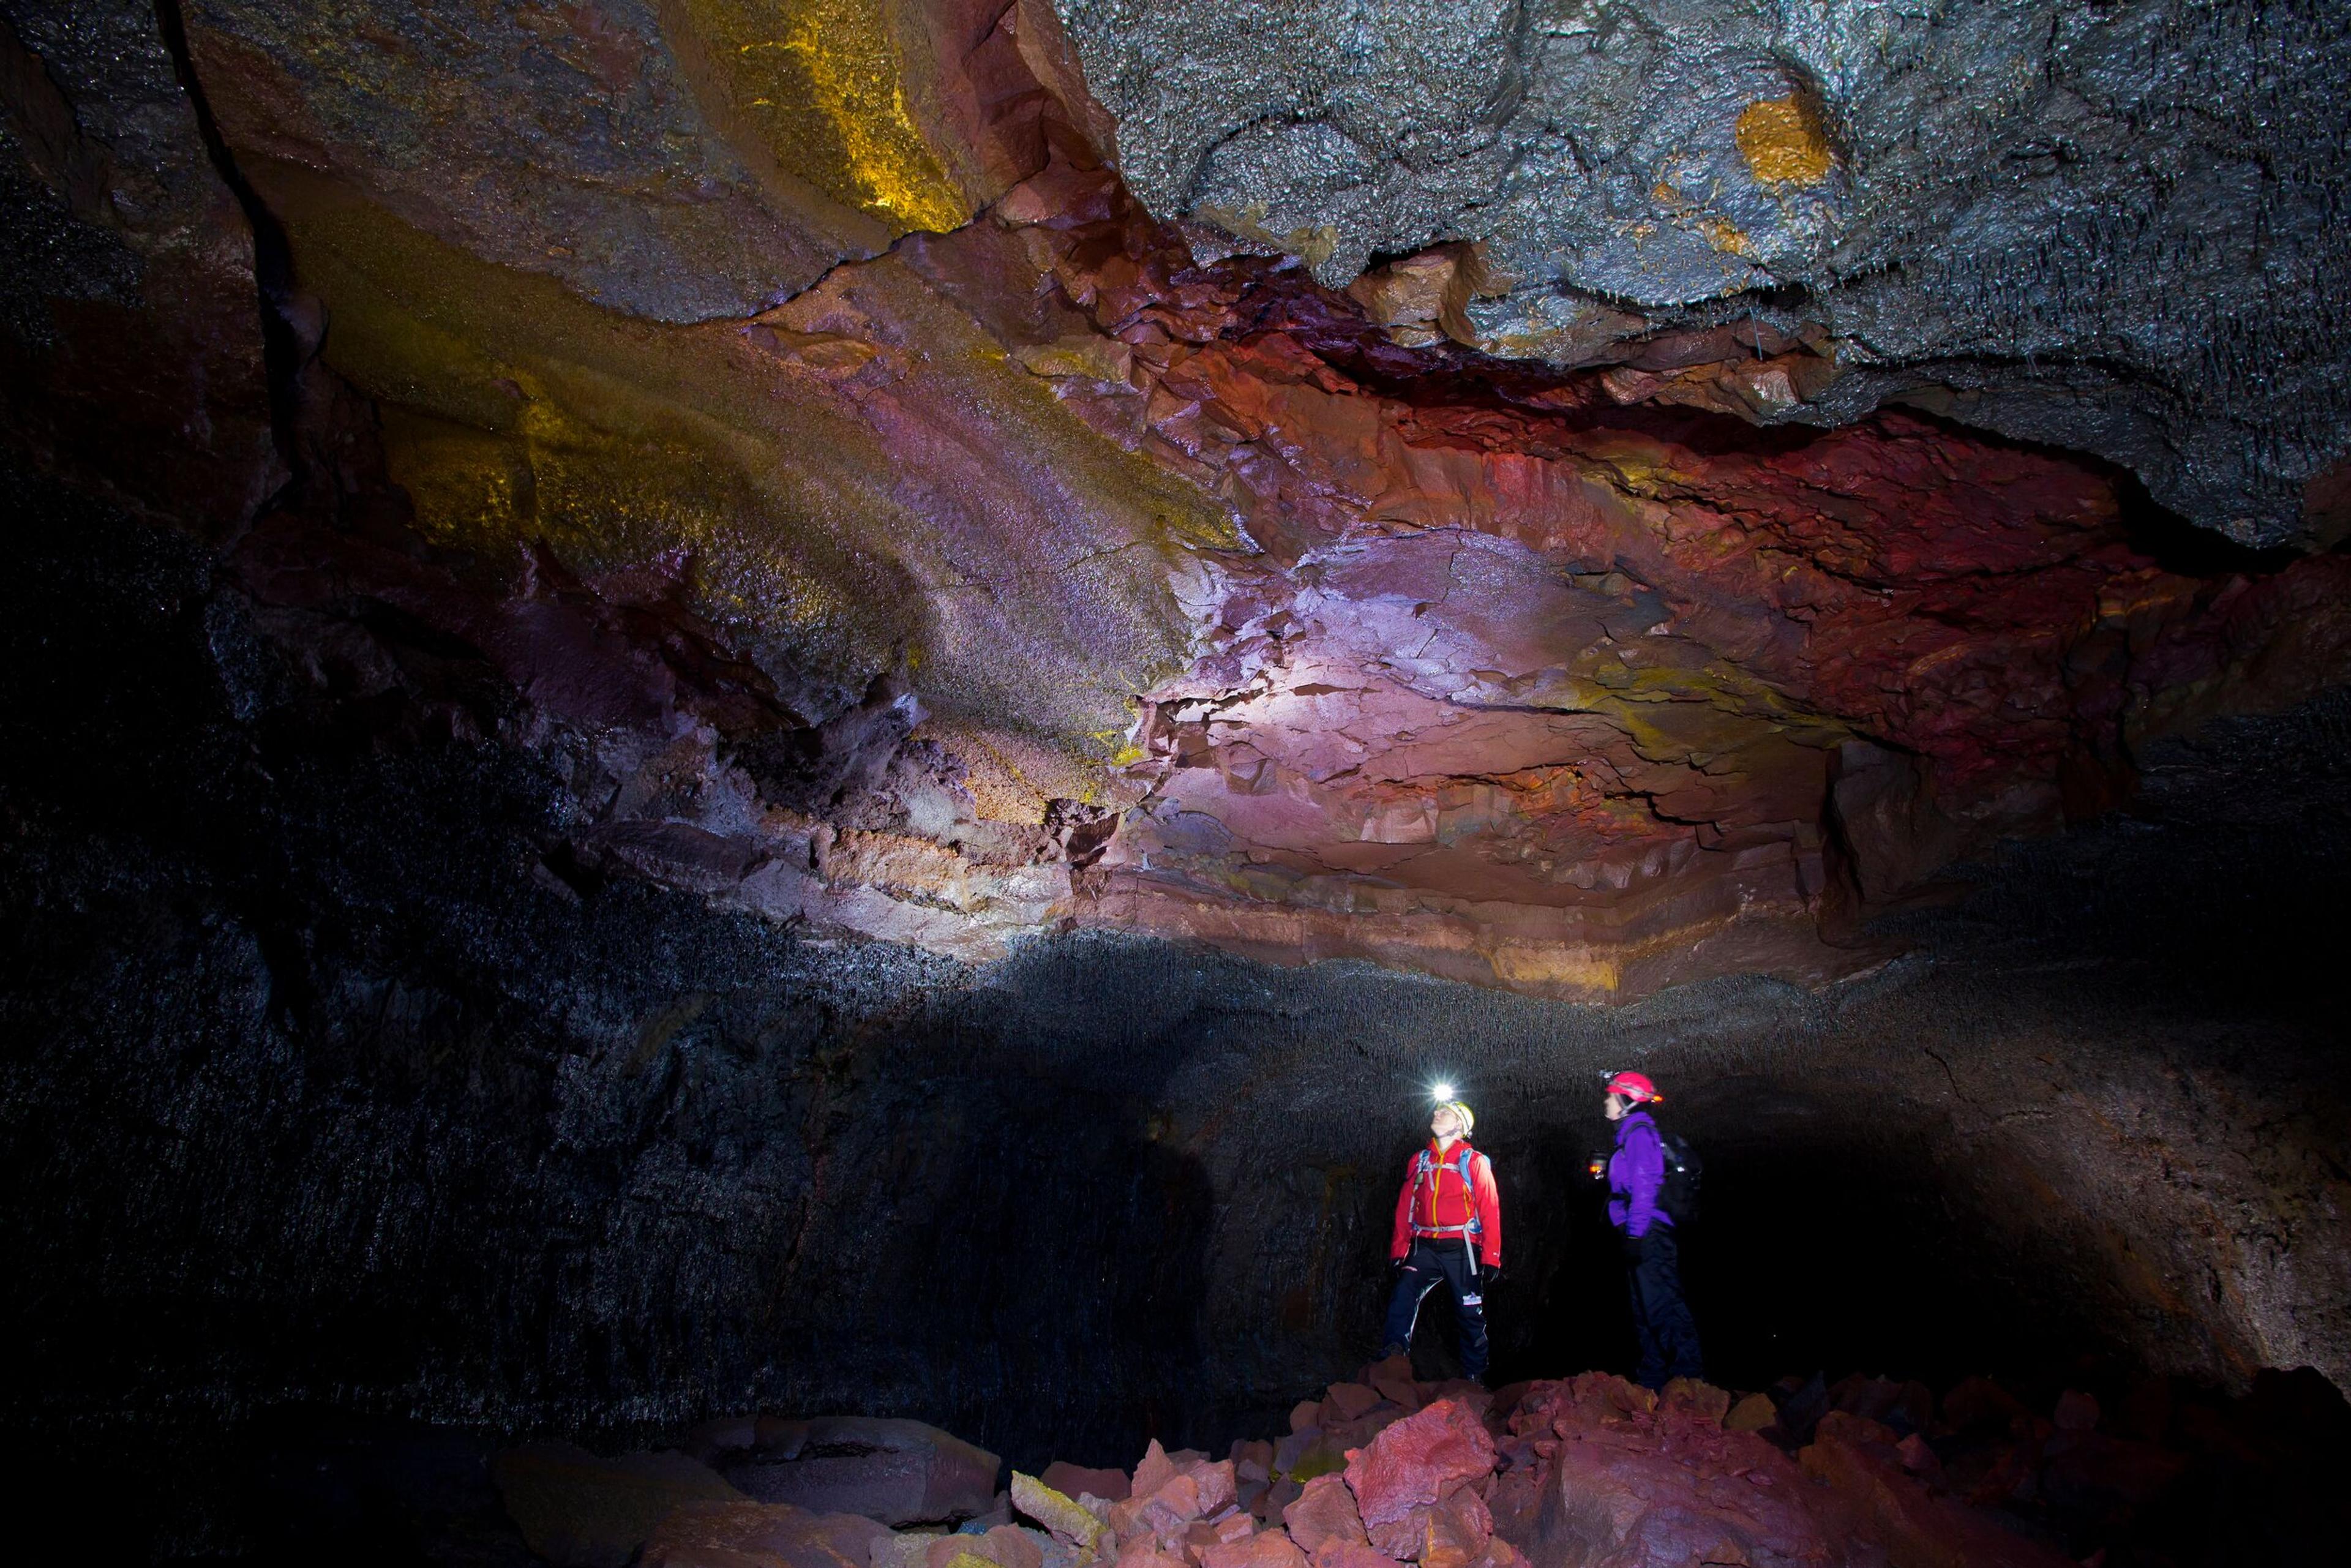 Two explorers inside a lava cave in Iceland